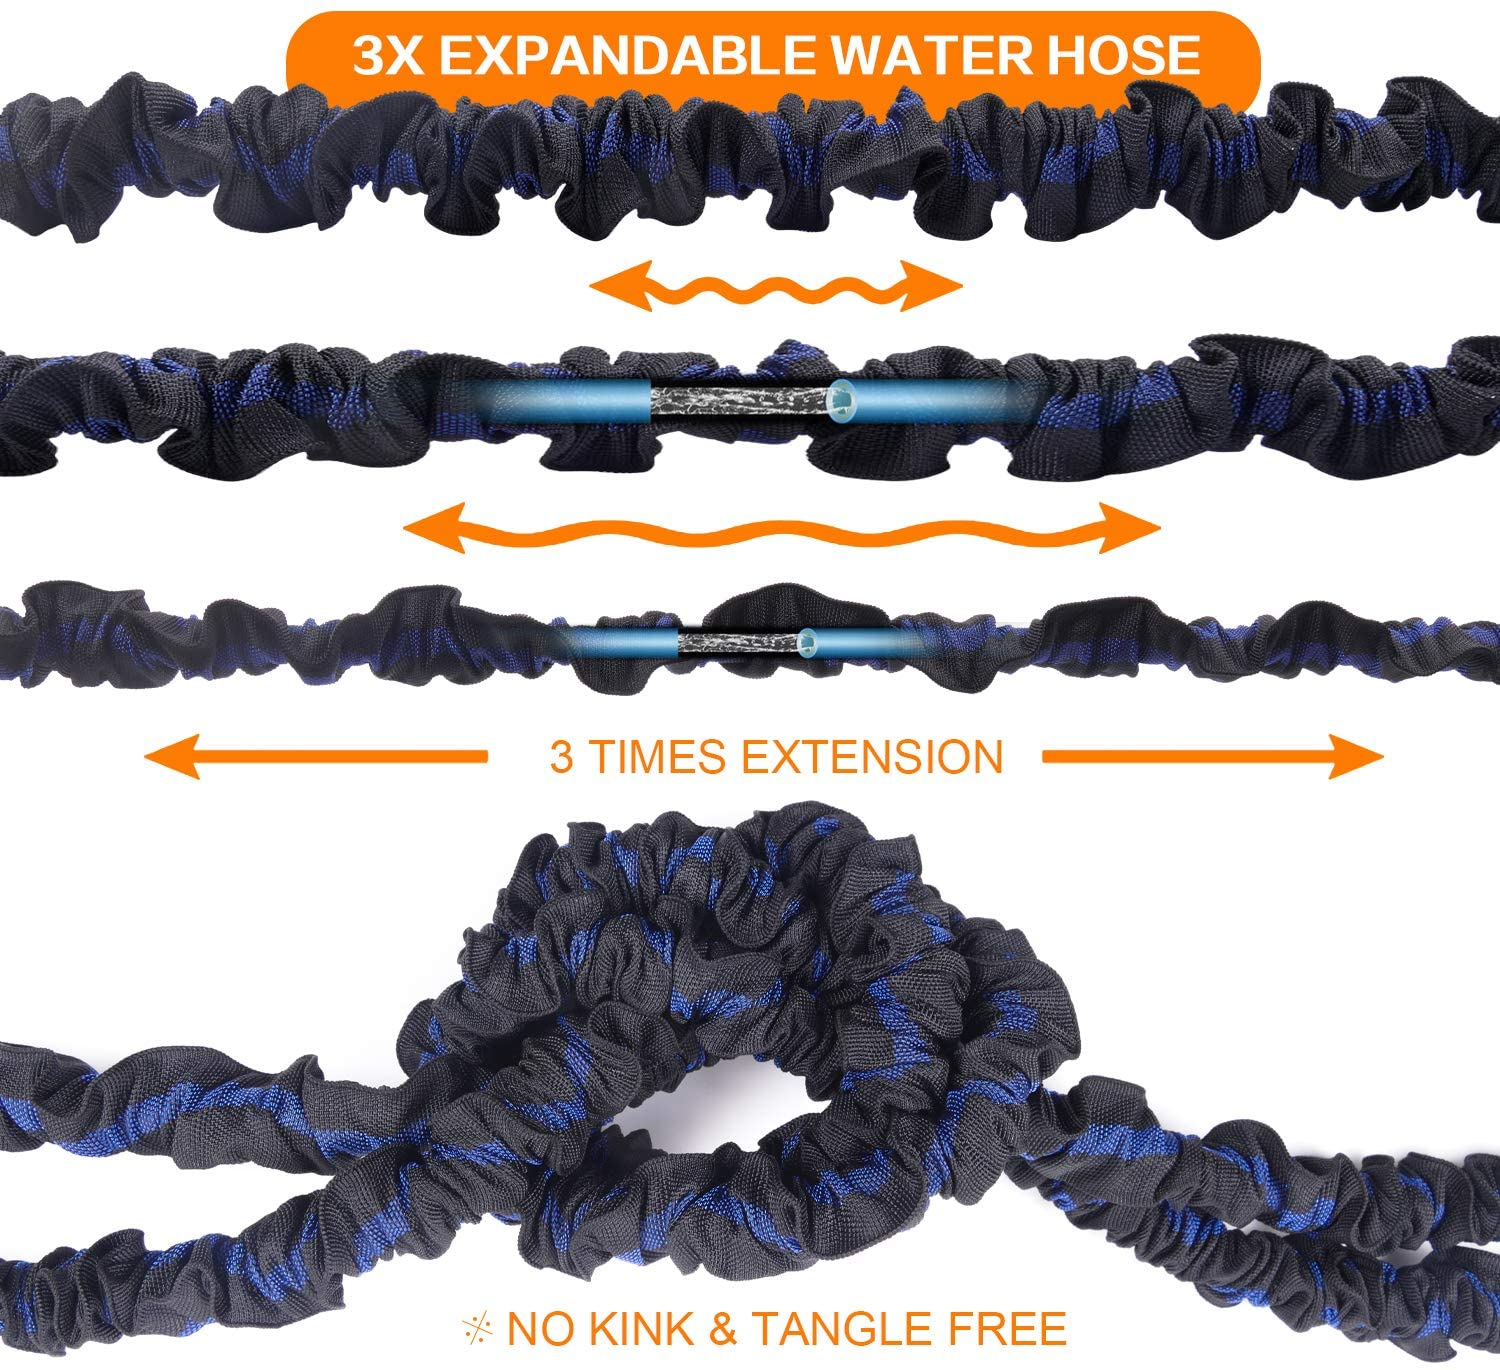 Garden Hose 50FT - Expandable Extra Strength Fabric Water Hose Flexible Lightweight Hose W/ Durable 4-Layers Latex